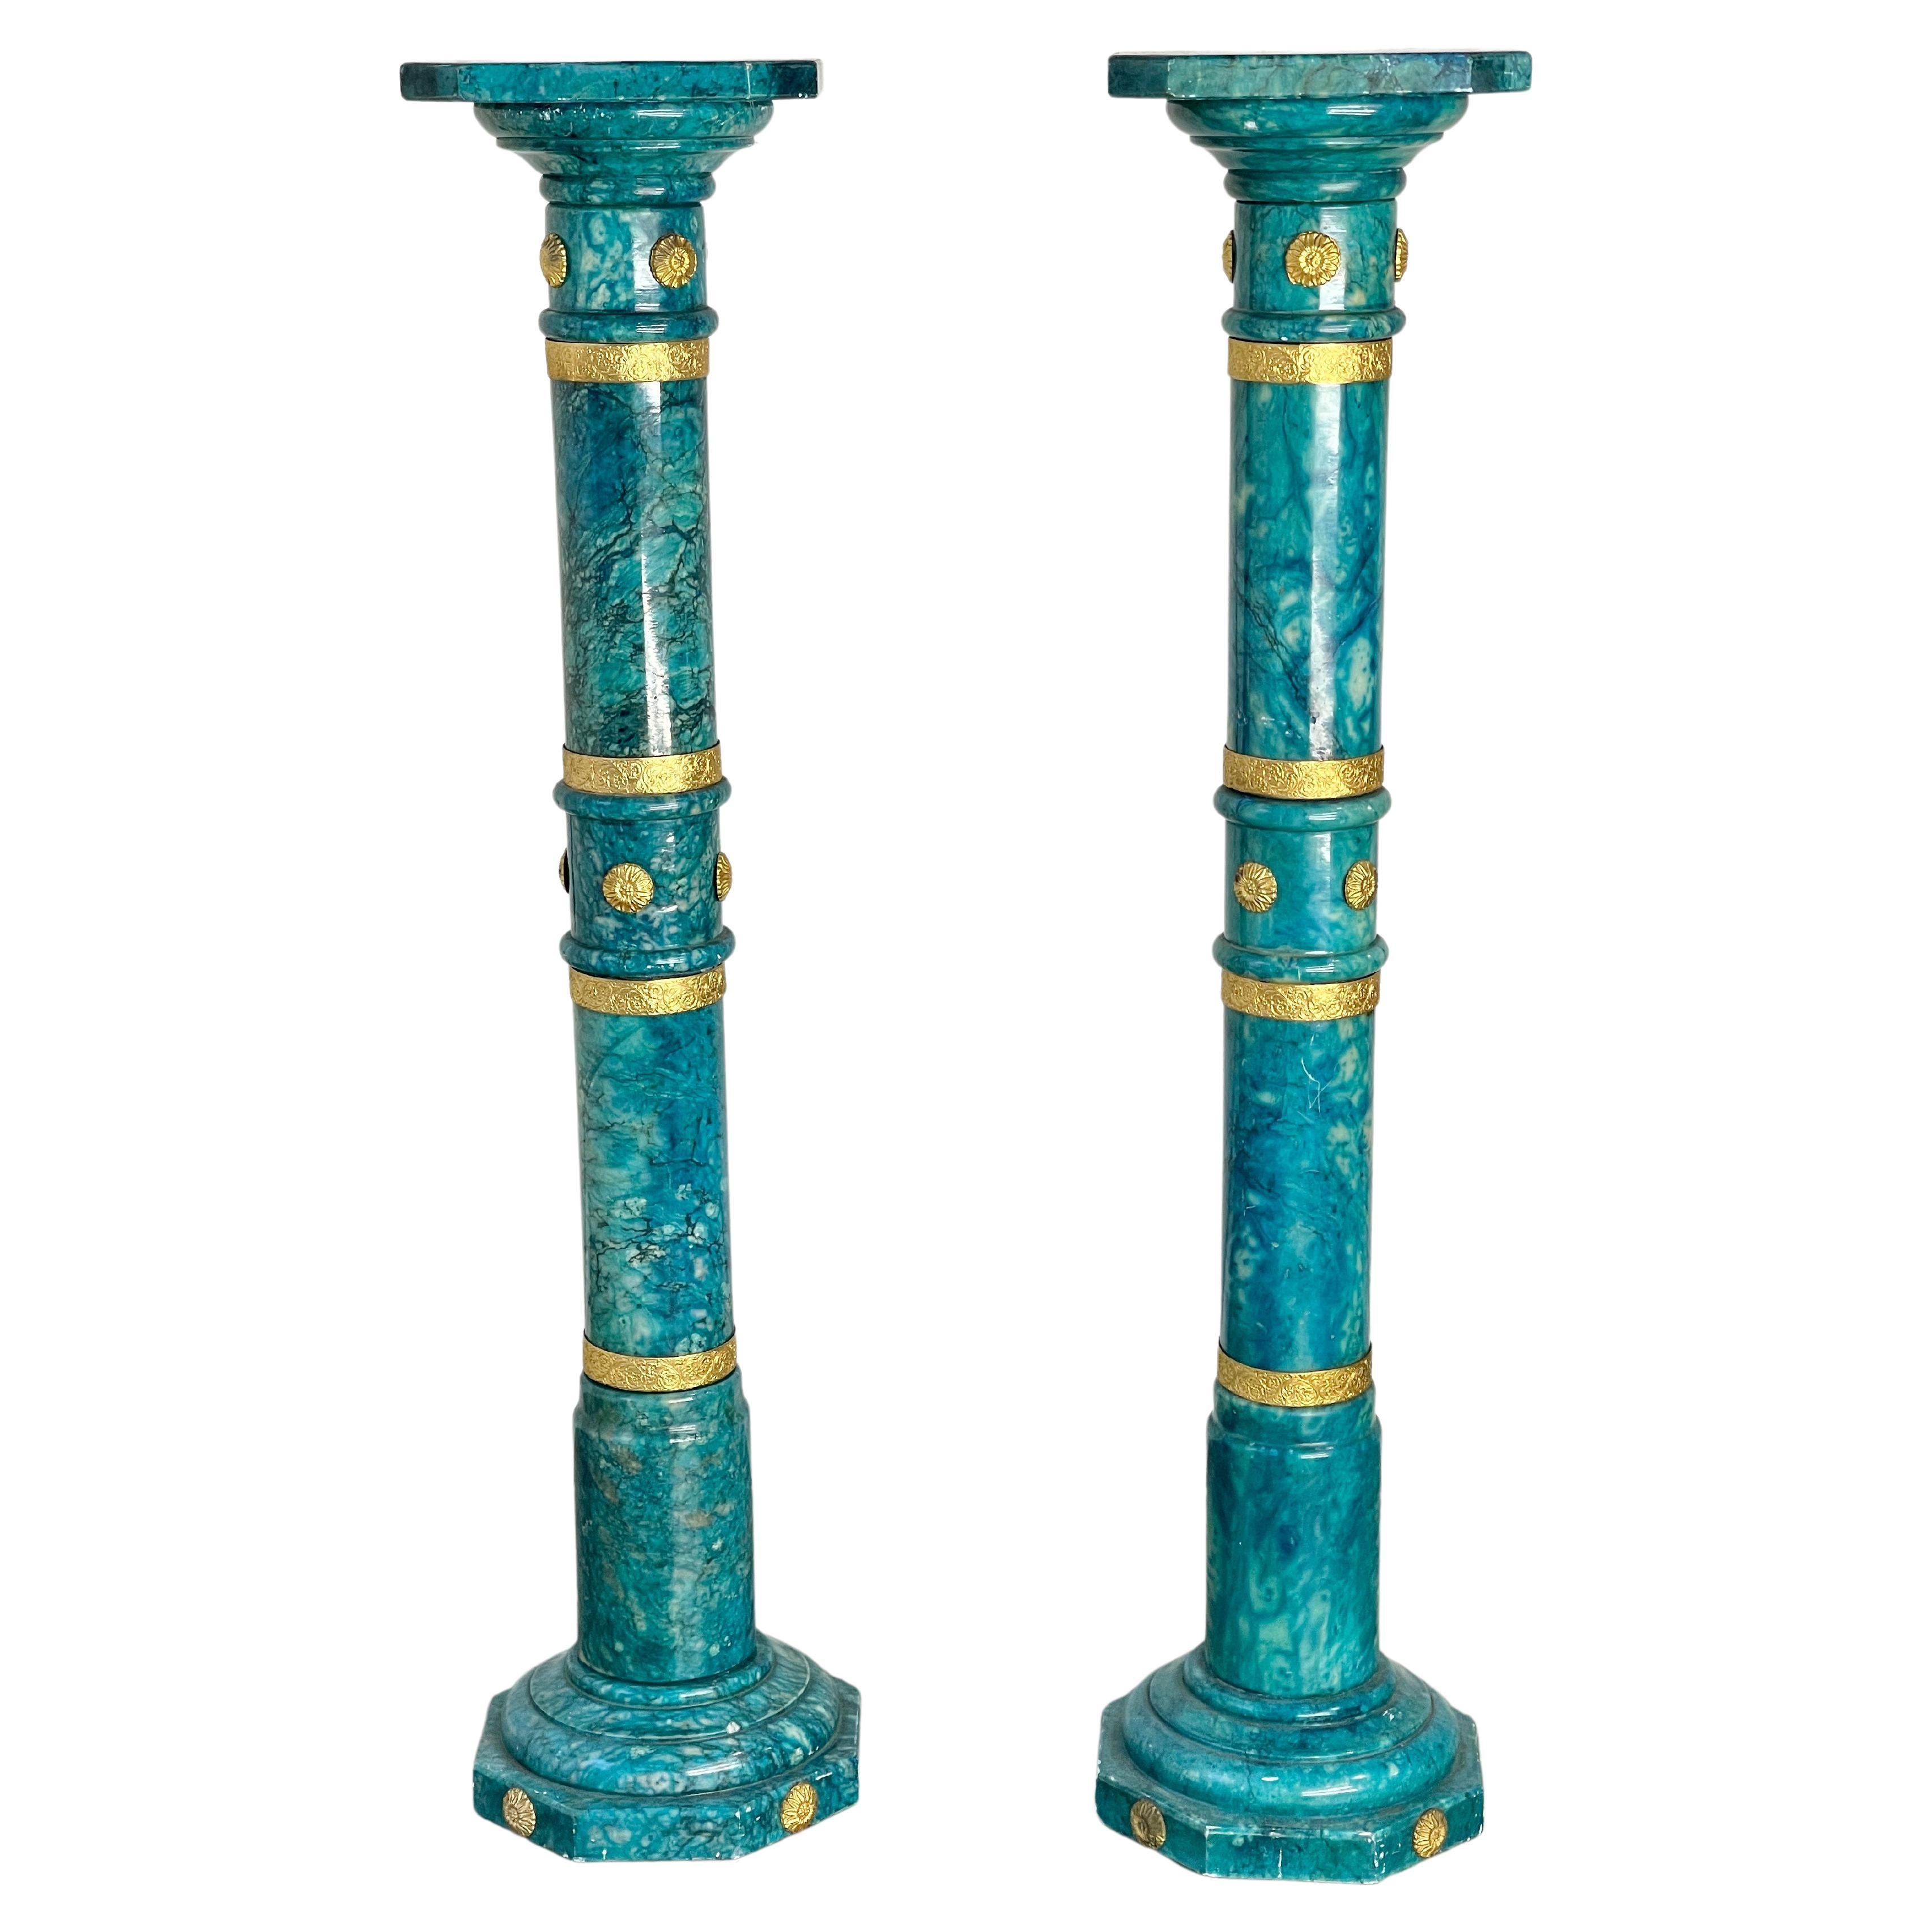 Pair of vintage Italian alabaster pedestal columns in vibrant blue-green color (not quite turquoise) and embellished with gilt brass bands and button medallions.
Their extraordinary color appears to have been achieved with a penetrating transparent